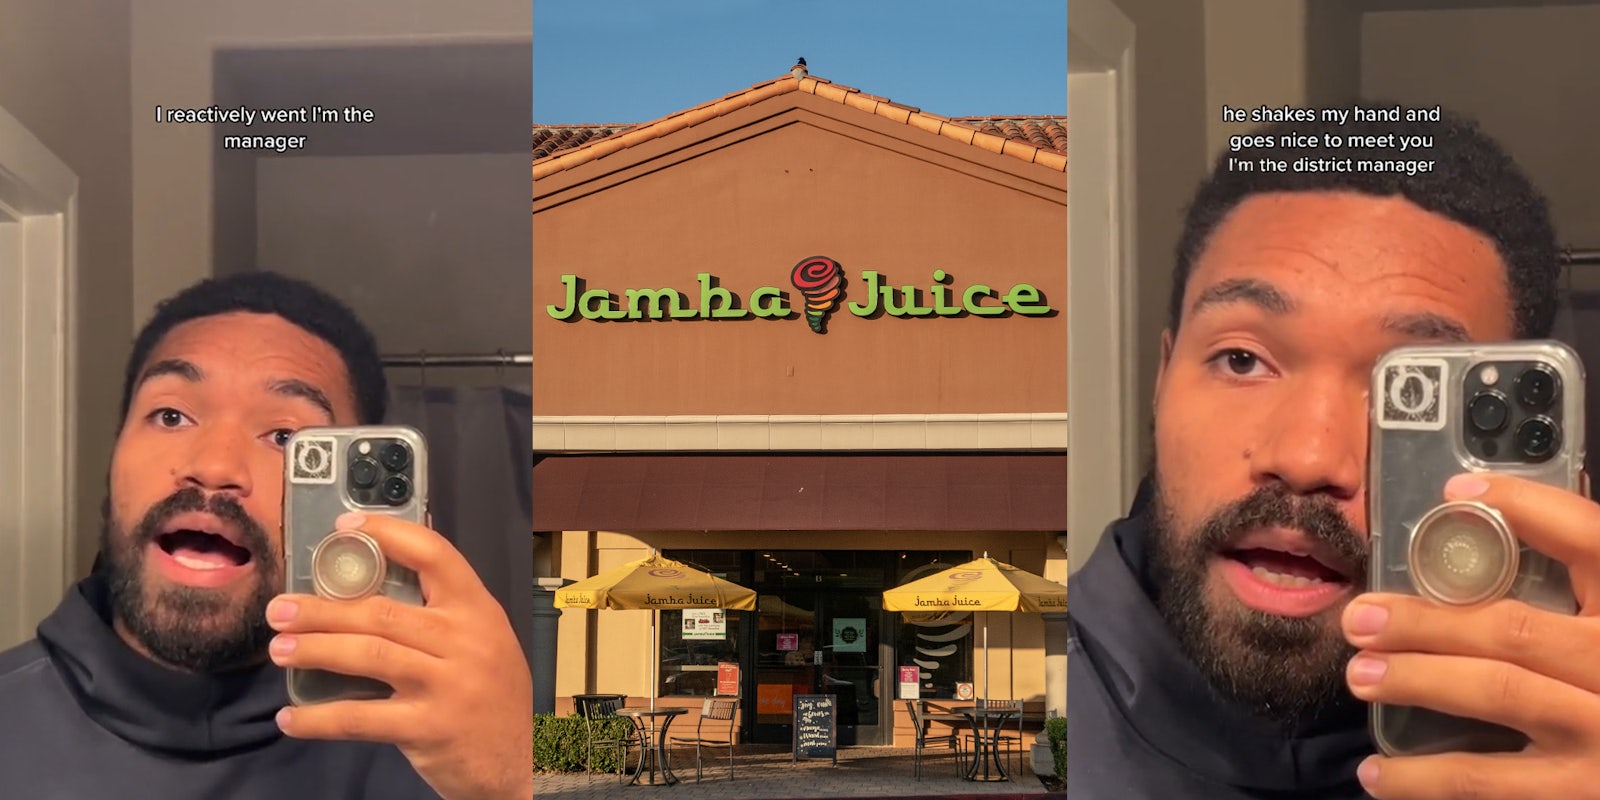 man speaking in mirror with caption 'I reactively went I'm the manager' (l) Jamba Juice sign on building (c) man speaking in mirror with caption 'he shakes my hand and goes nice to meet you I'm the district manager' (r)